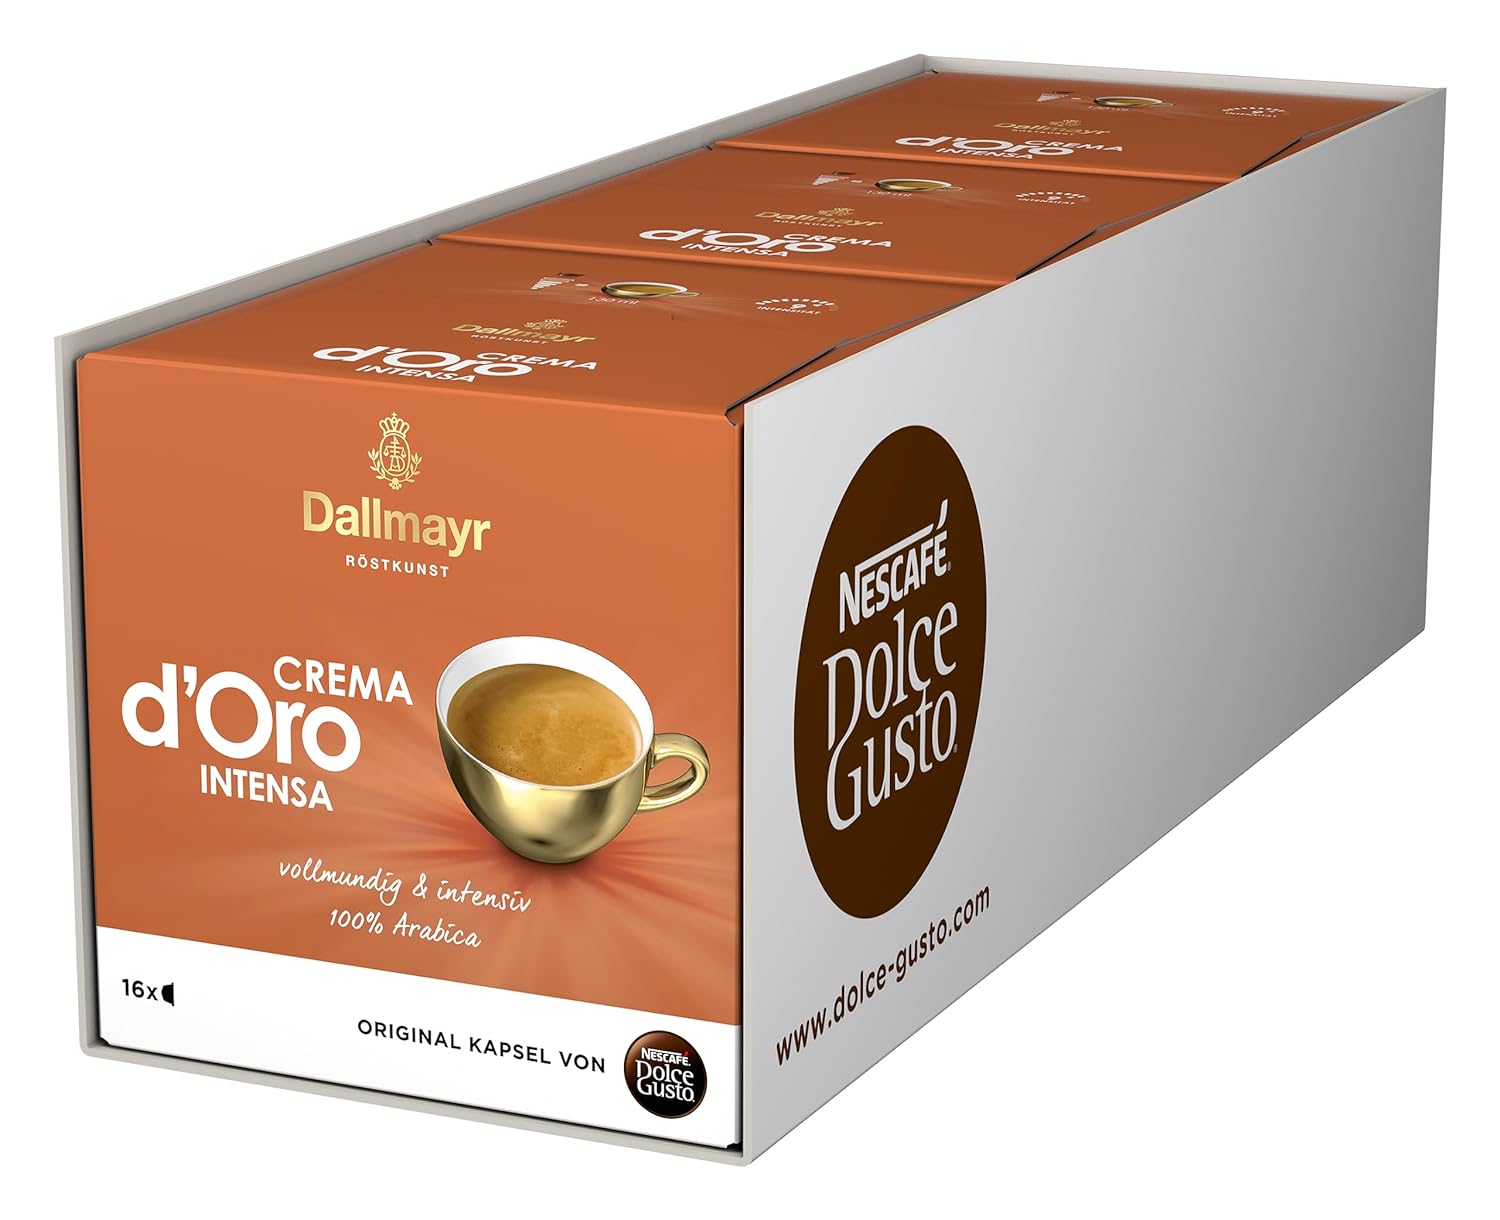 NESCAFÉ Dolce Gusto Dallmayr Crema d'Oro Intensa (48 Coffee Capsules, Intensity 9 out of 12, 100% Arabica Beans), Pack of 3 (3 x 16 Capsules)